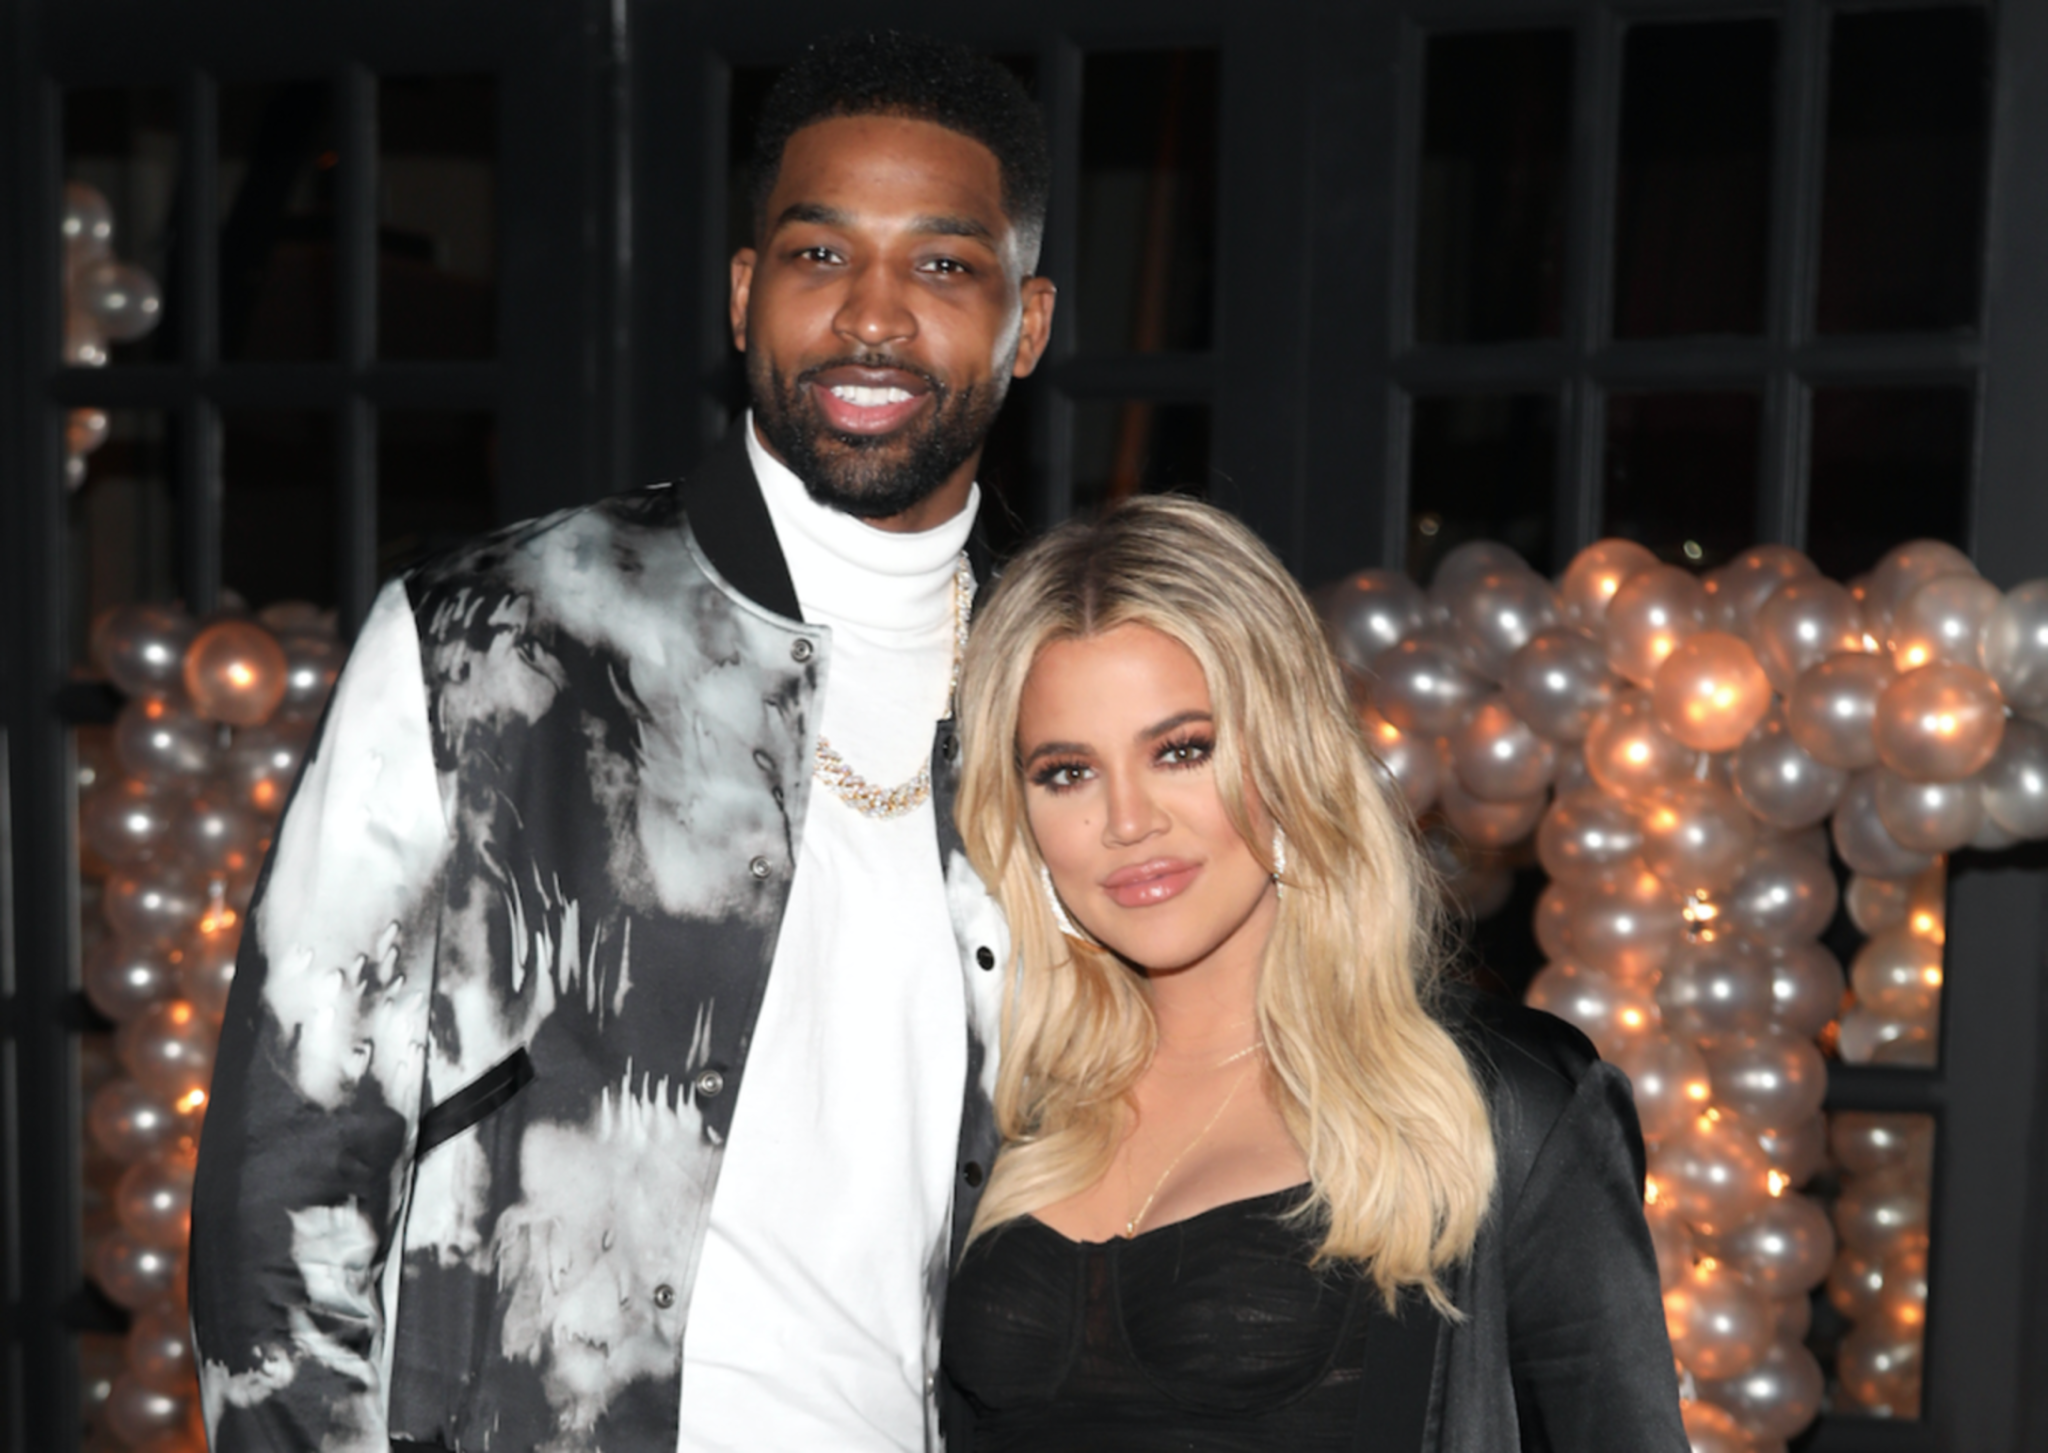 Tristan Thompson Finally Admits To Cheating & Fathering a Baby While With Khloé Kardashian